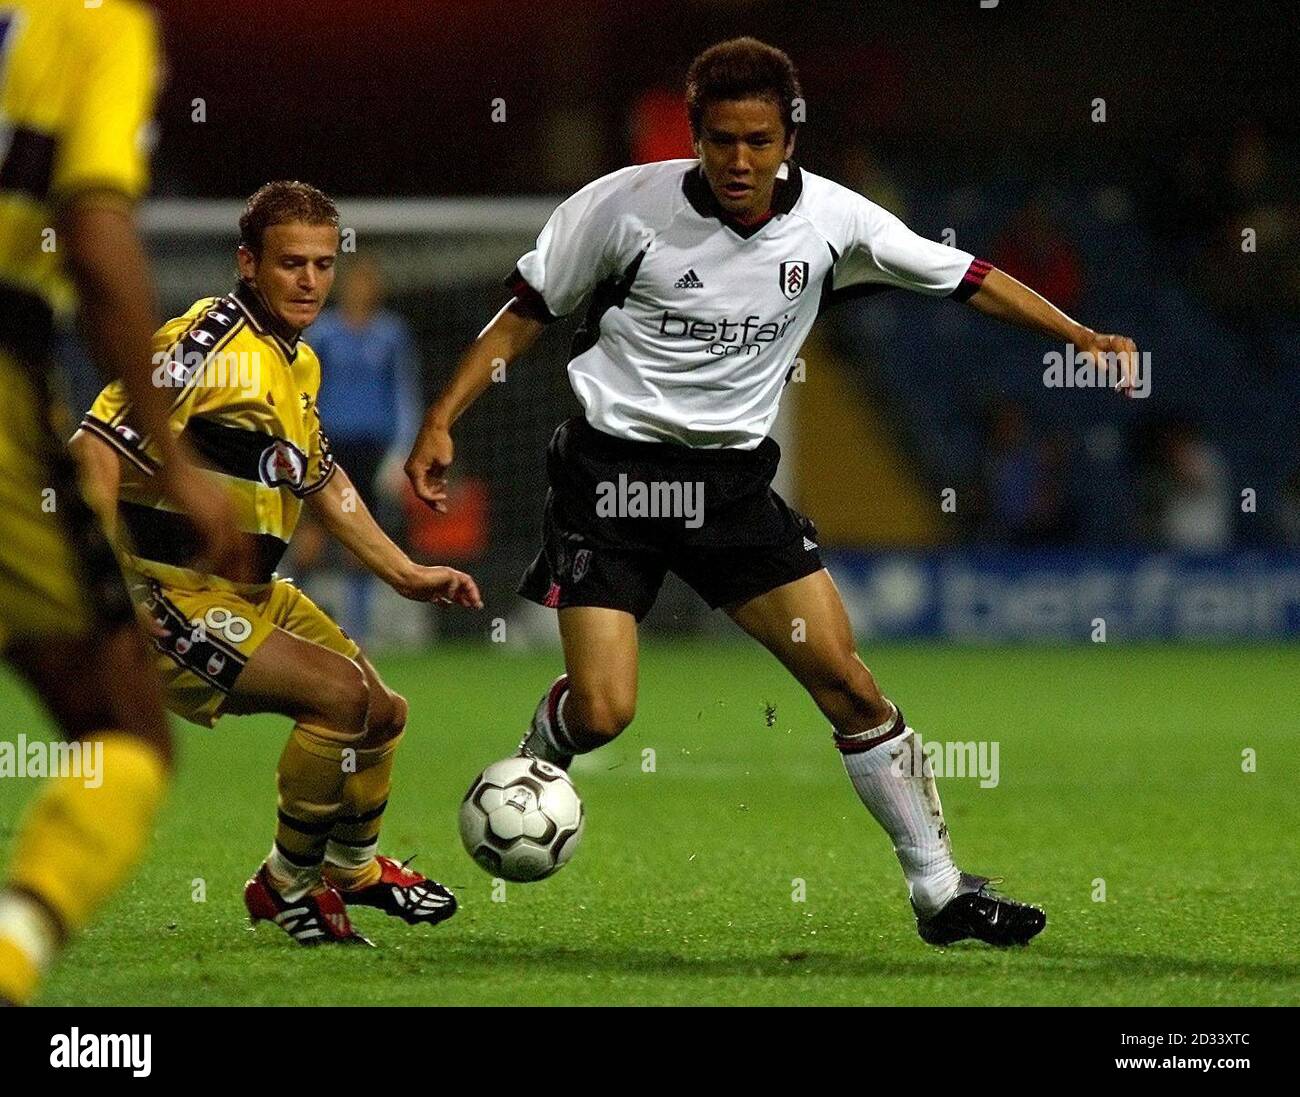 Junichi Inamoto of Fulham gets past Fabien Boudarne of Sochaux during Fulham's 1-0 victory in tonights Intertoto Cup Semi Final 1st Leg at Loftus Road, London. Stock Photo